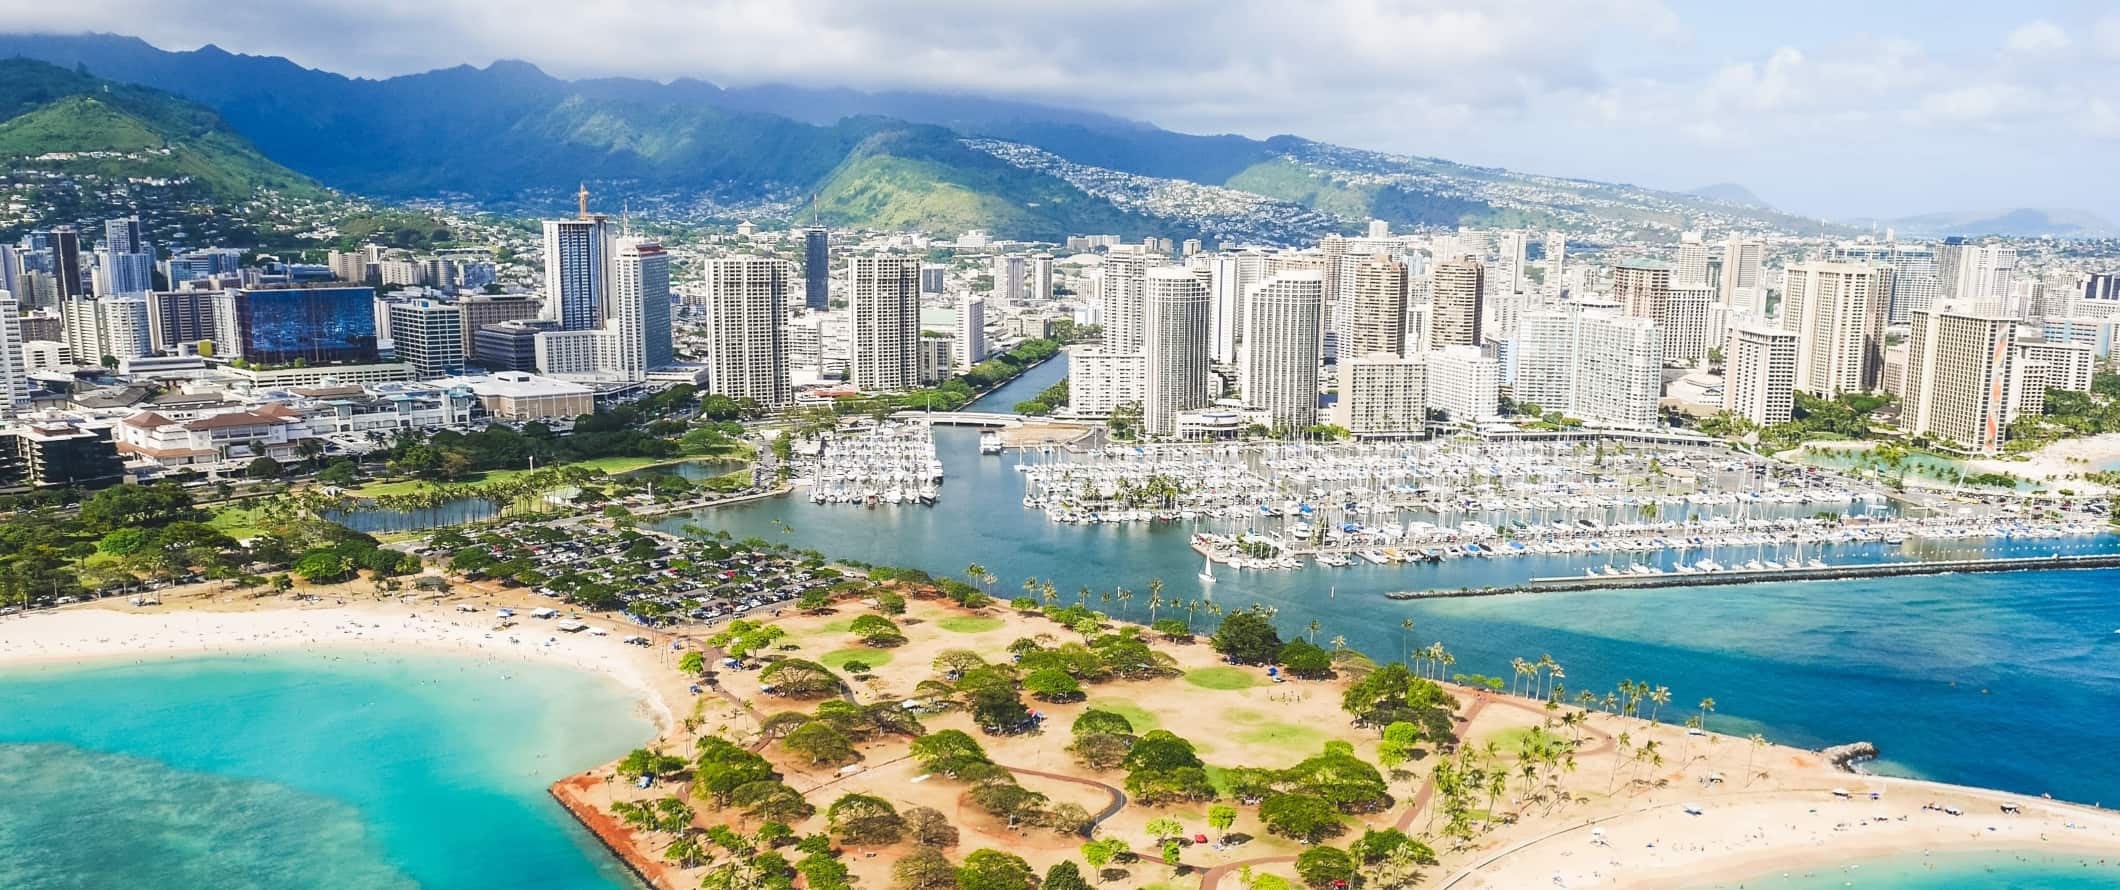 Panoramic view of skyscrapers and mountains in Honolulu, Hawaii.